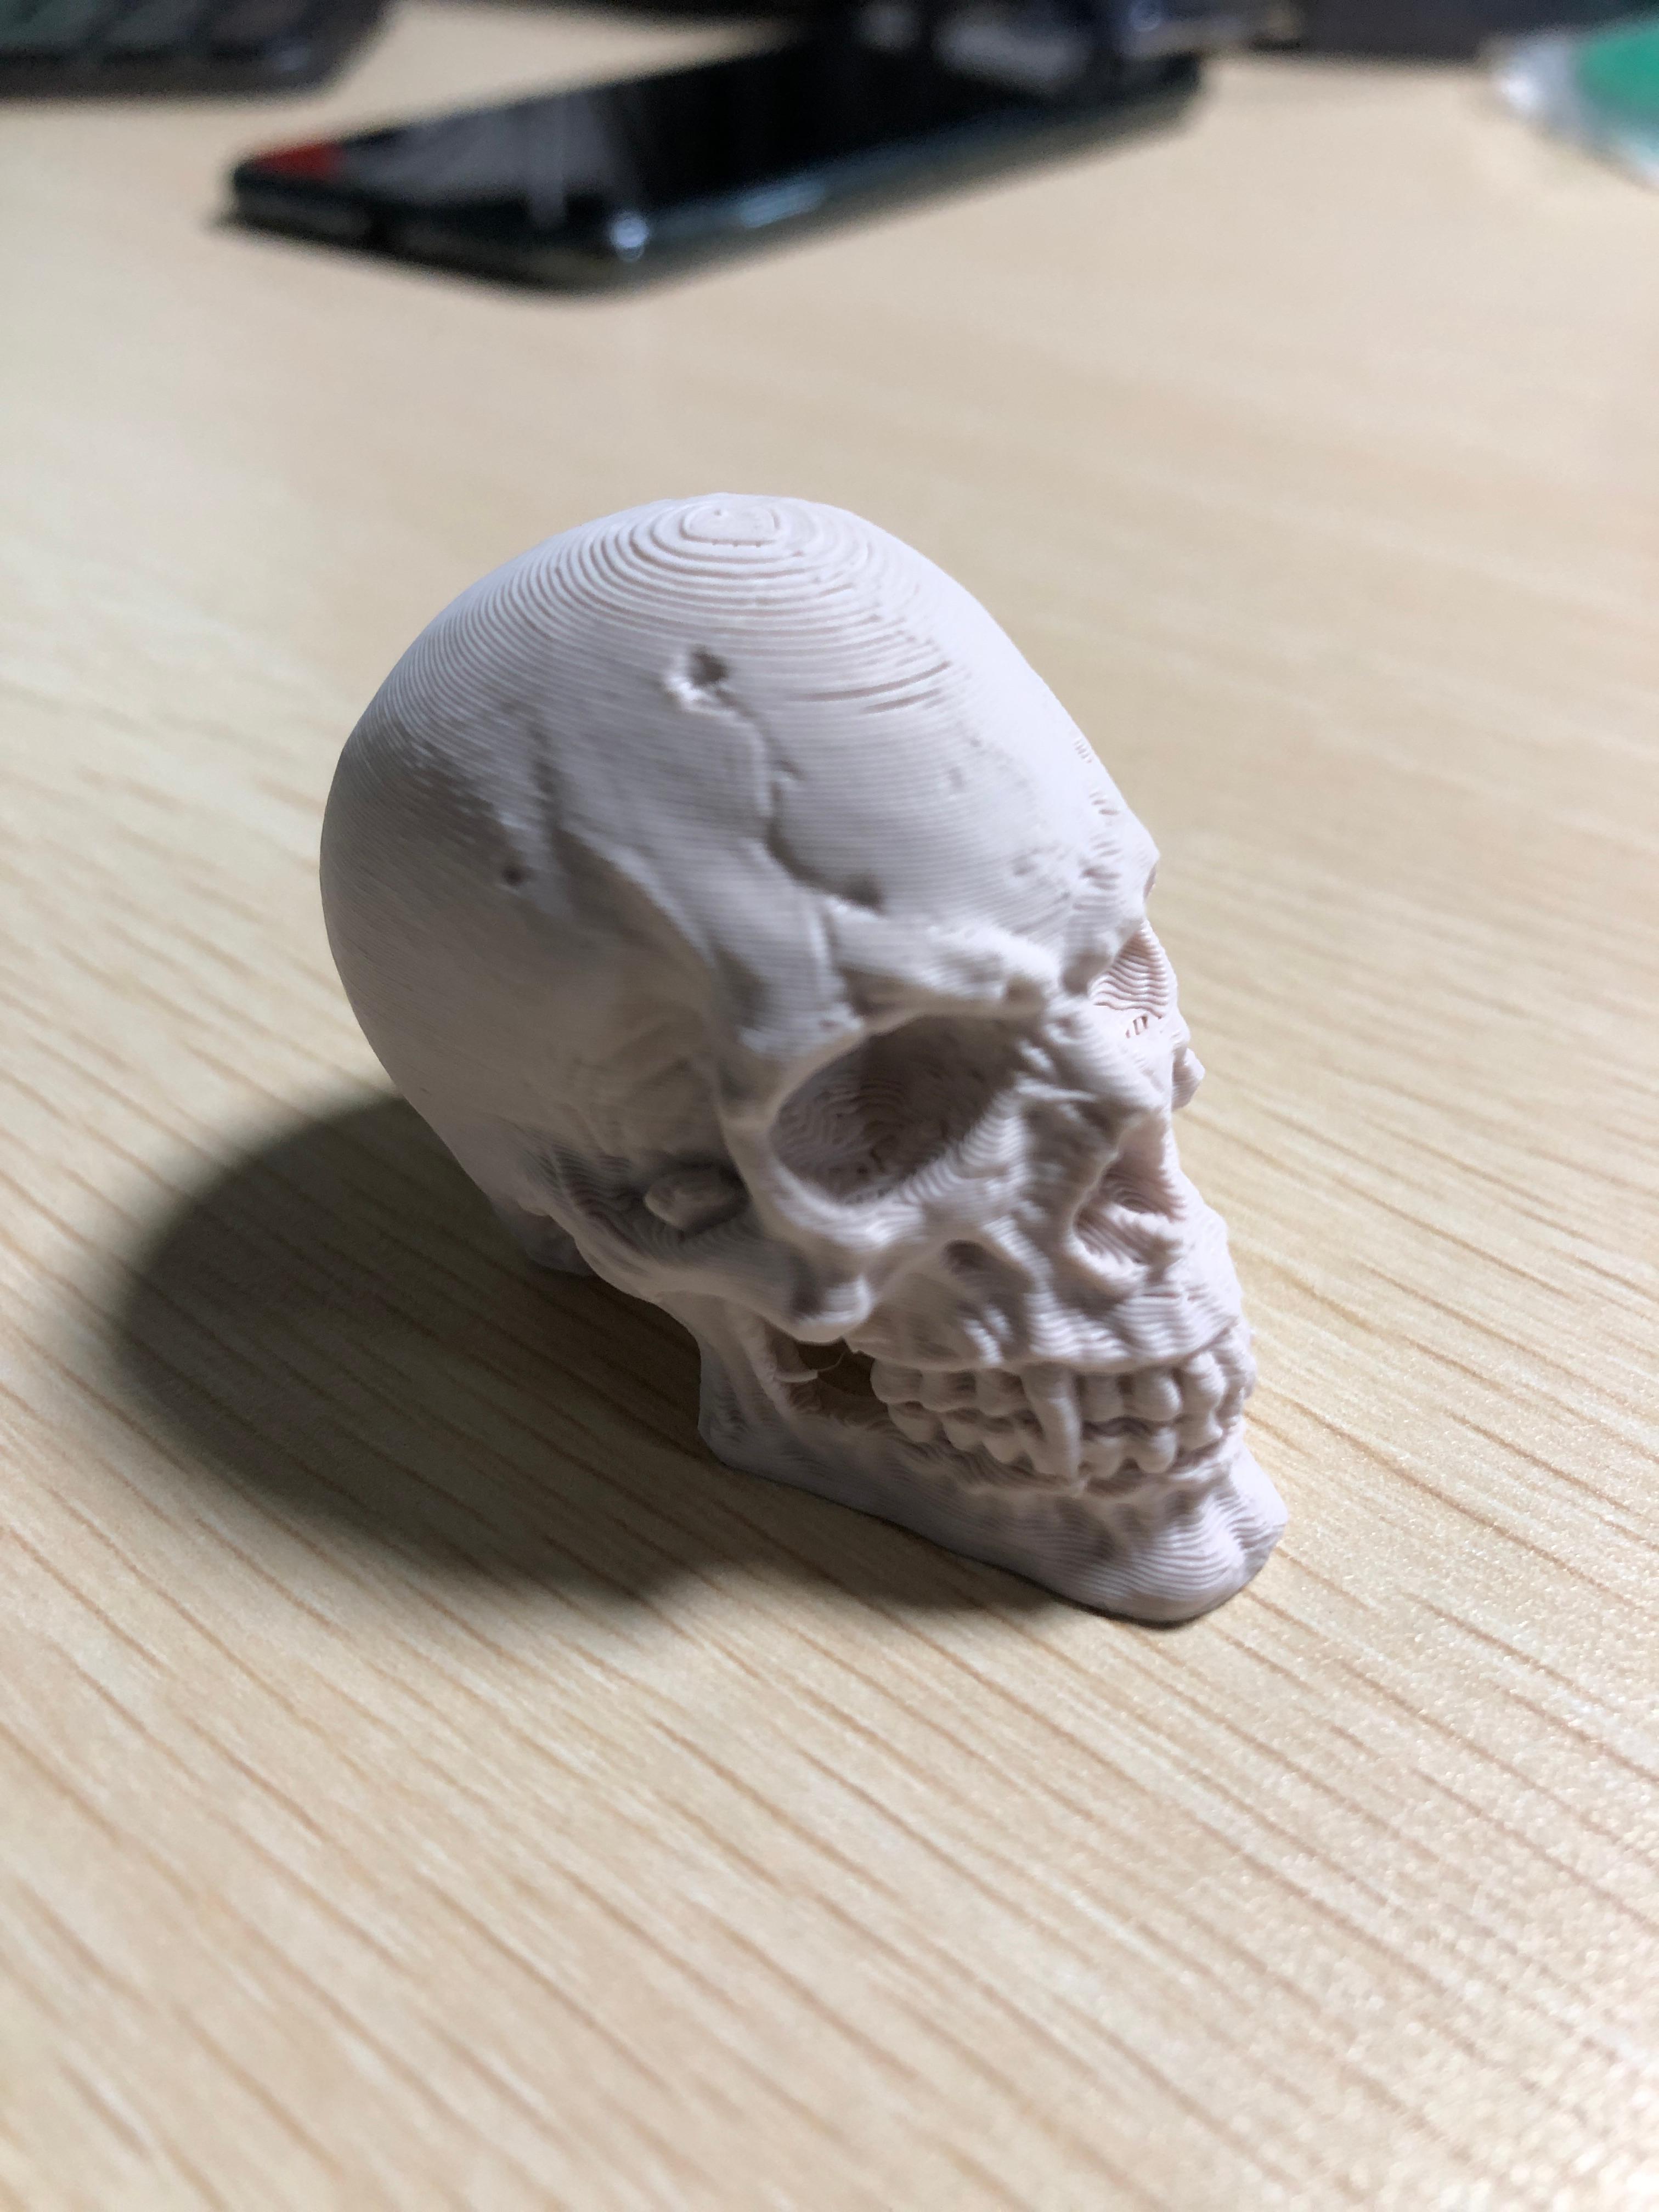 Vampire Skull - Decoration - 50% print size. I'm still tuning my slice to remove the swirl on top. The detail is amazing! Very well done PrintedObsession. This took a little under 2 hours to print. - 3d model